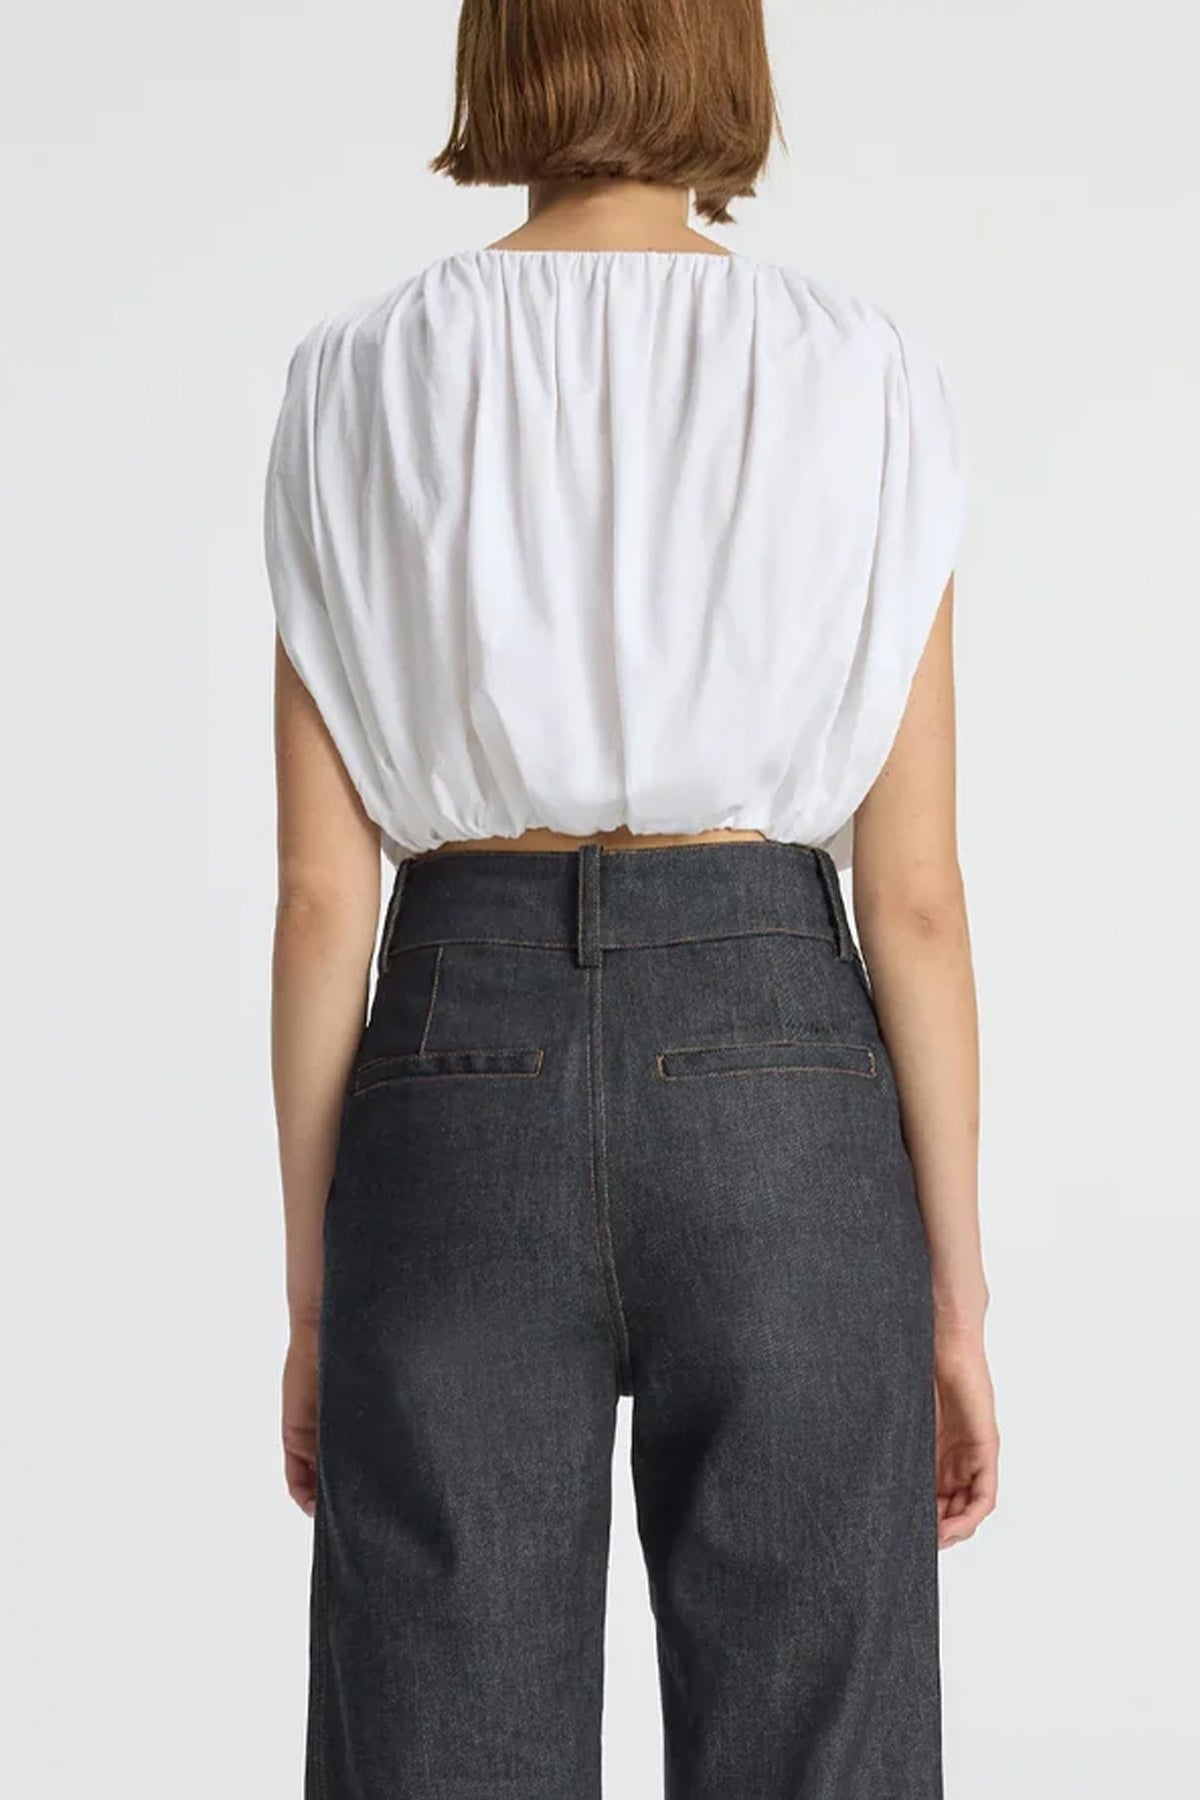 Nell Cropped Cotton Jersey Tee in White - shop-olivia.com